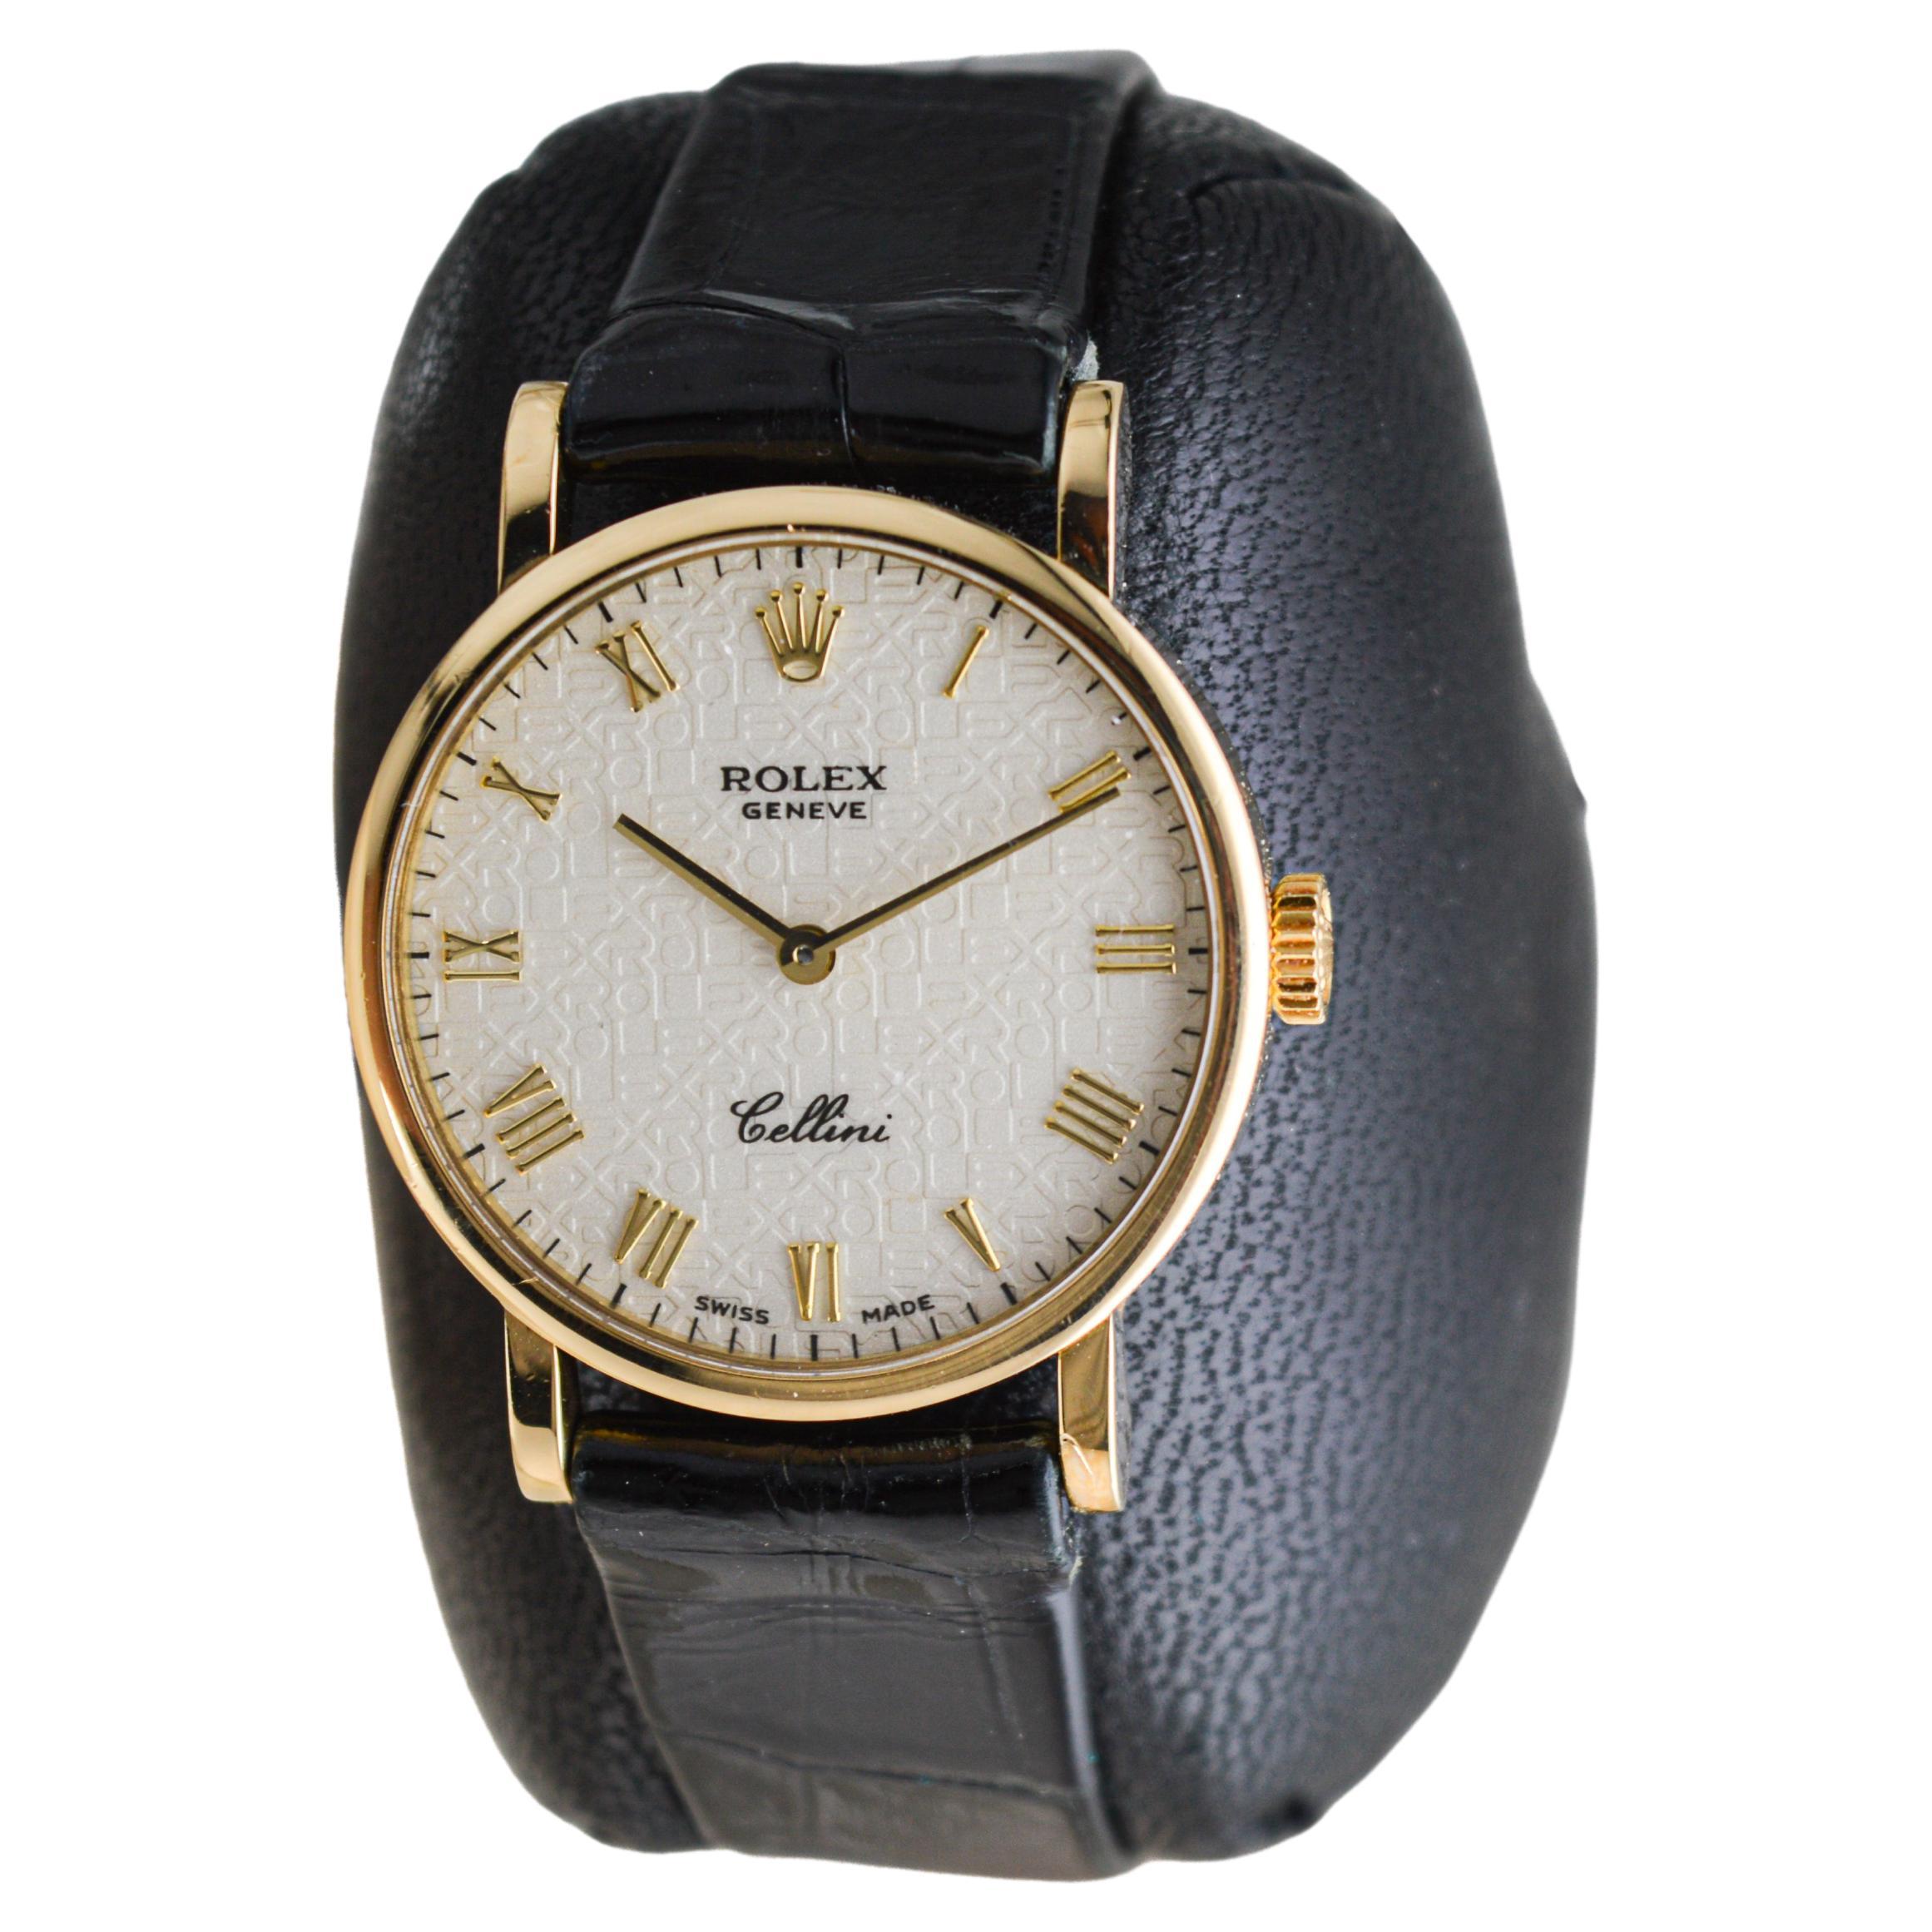  Rolex Cellini 18Kt. Solid Gold Ladies Watch with Original Strap and Buckle  1